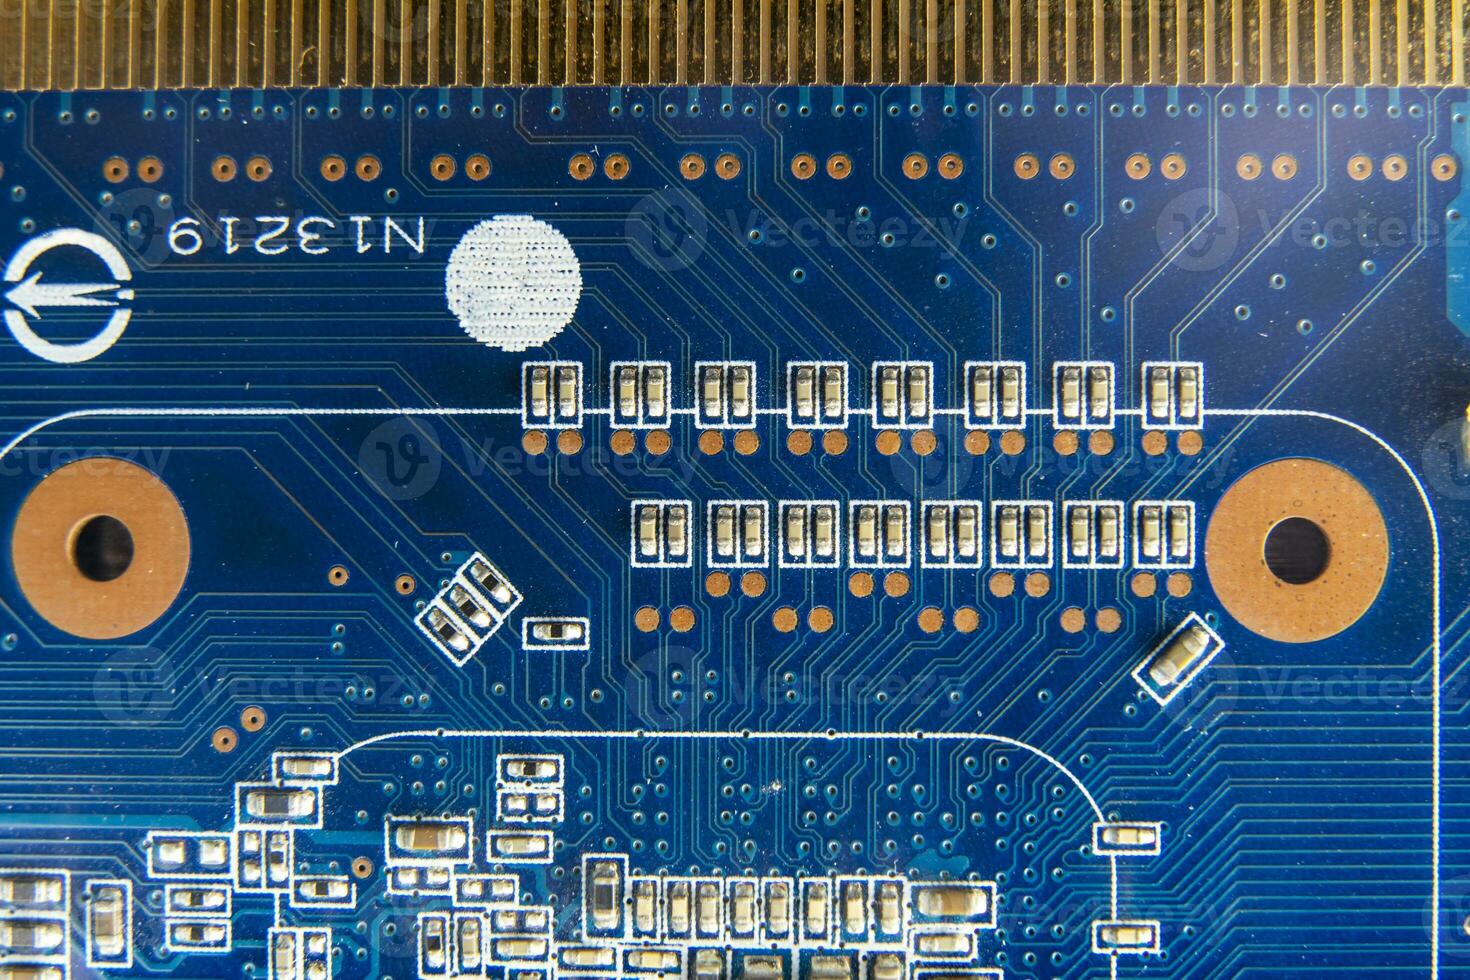 resistors on the blue printed circuit board. pcb photo